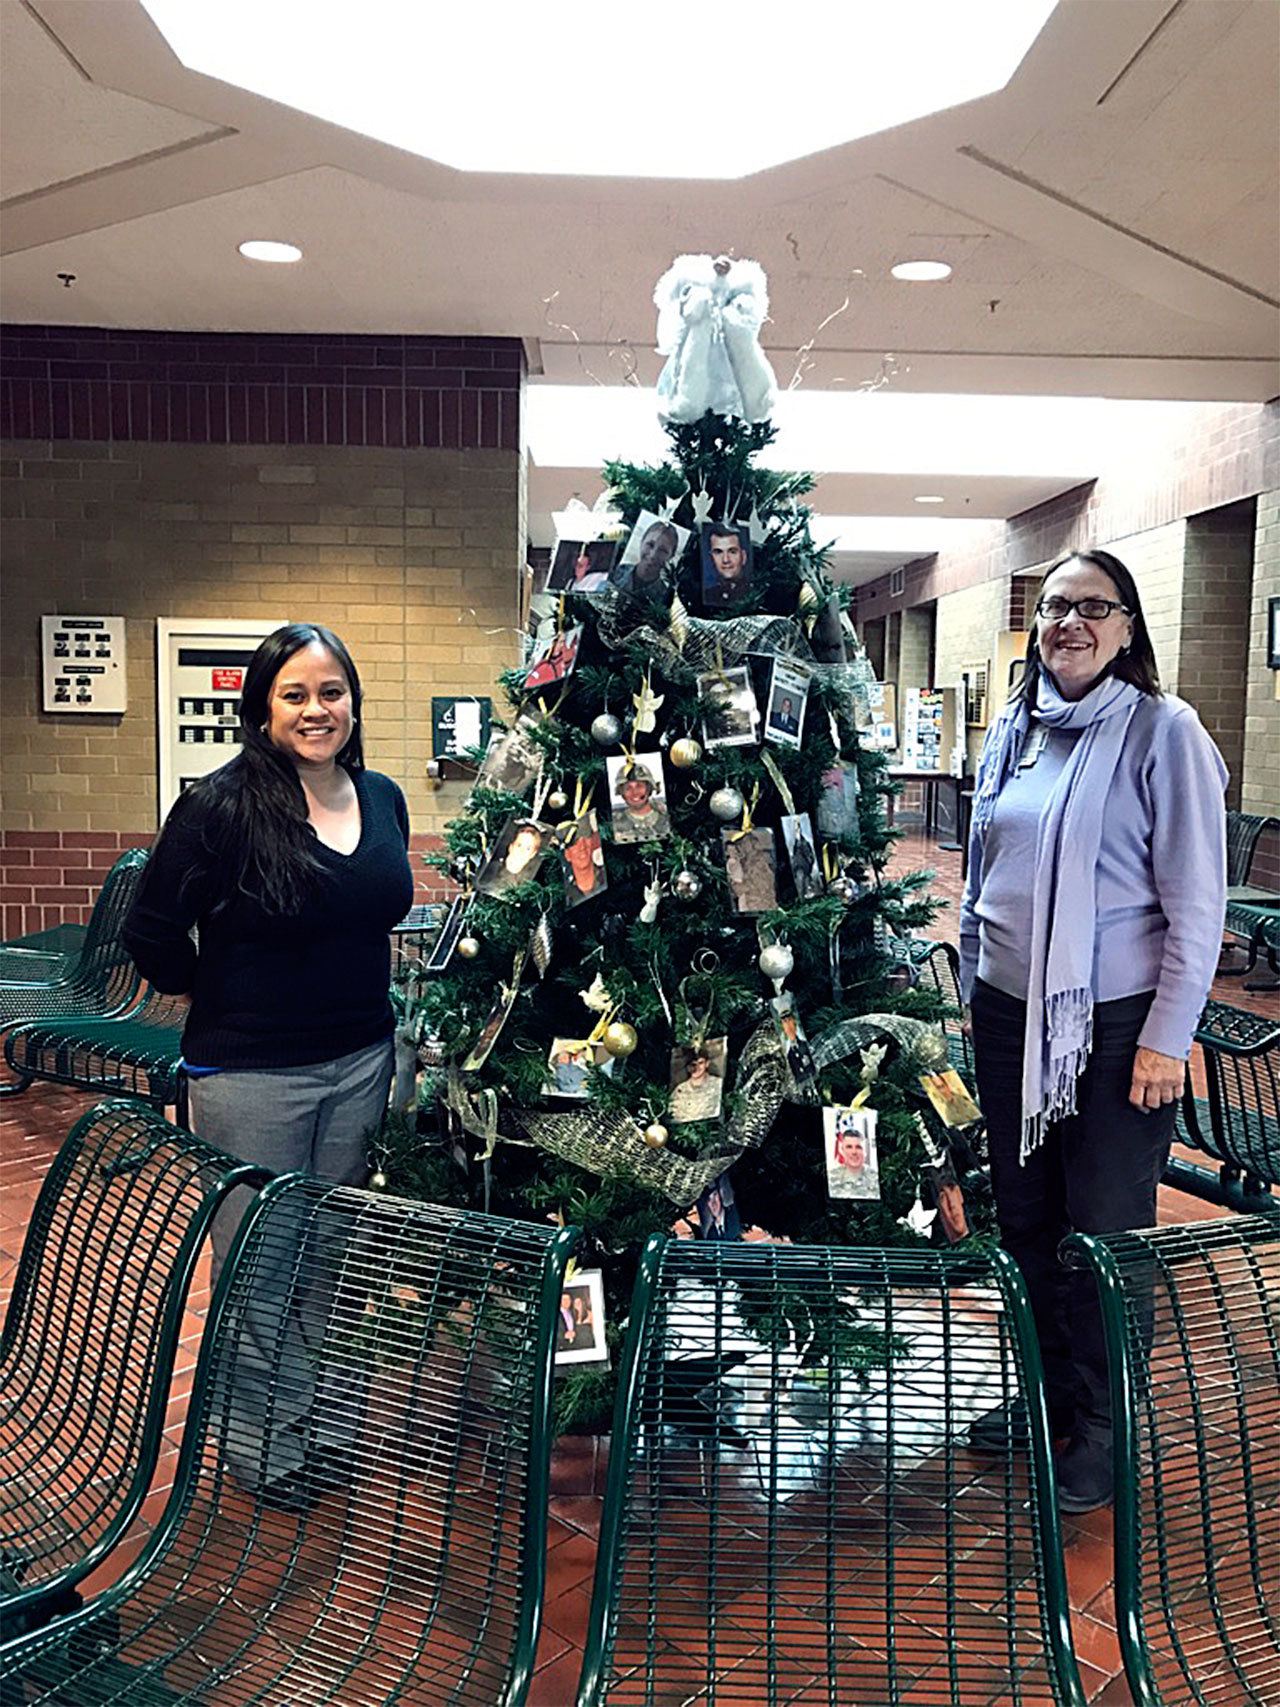 The Hero Tree, honoring and remembering Washington Fallen Heroes, was on display at Naval Station Everett over the holidays thanks to the Navy Gold Star Program, as represented by Tina Soukup (left), and the American Gold Star Mothers of Washington, represented by Myra Rintamaki. (Contributed photo)